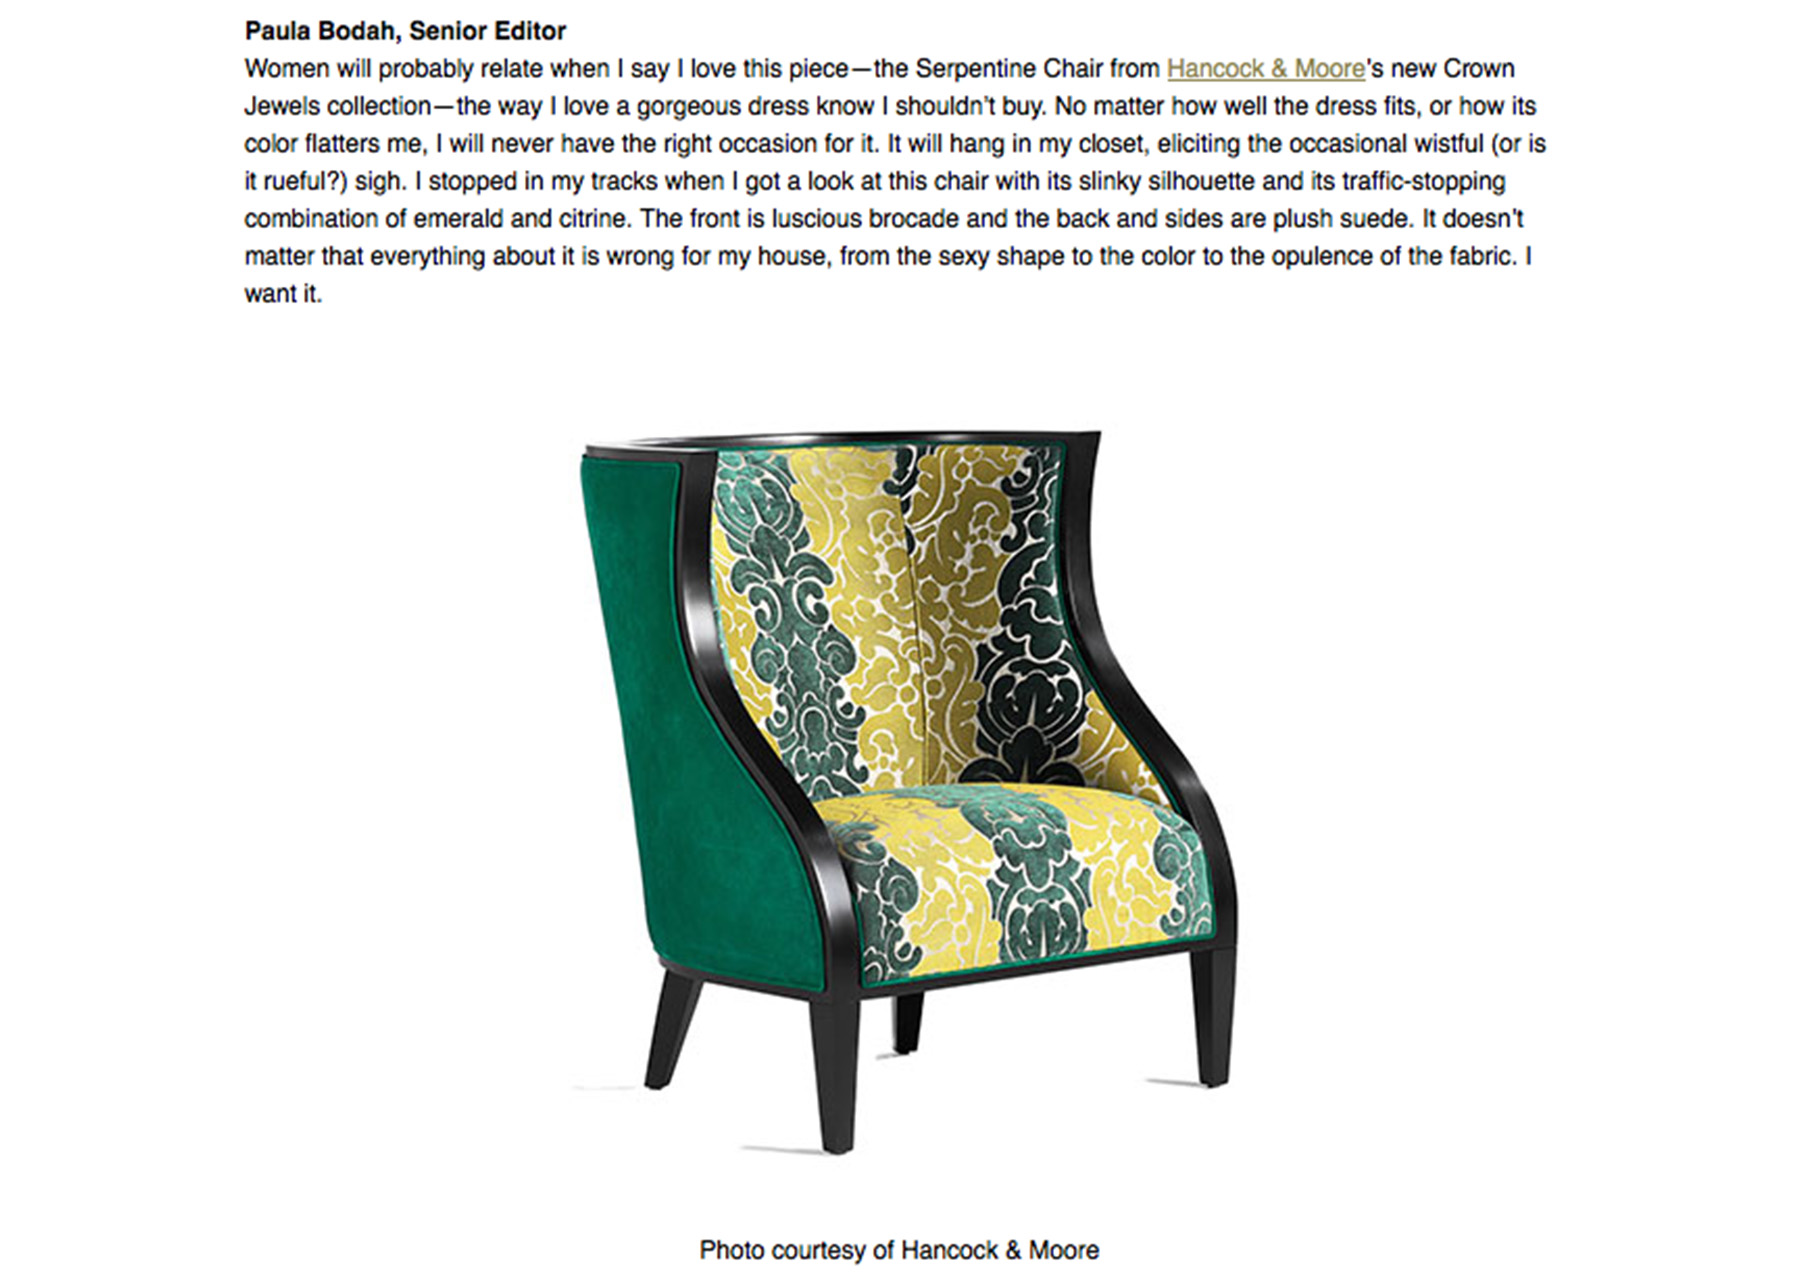  New England Home's blog 2014-Serpentine Chair 